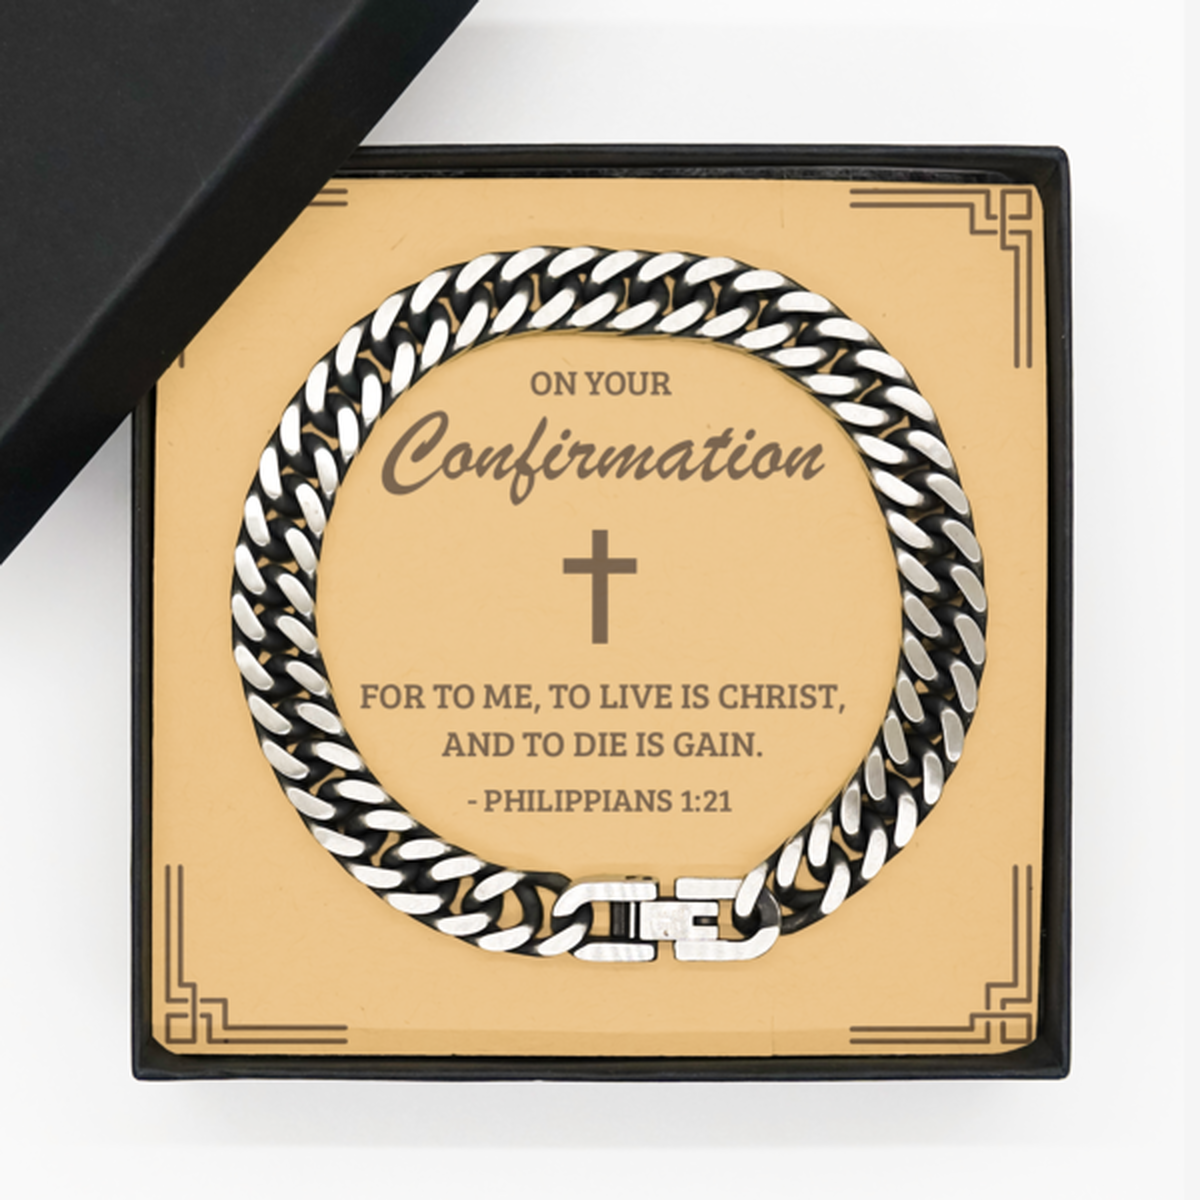 Confirmation Gifts for Teenage Boys, To live is Christ, and to die is gain, Cuban Link Chain Bracelet with Bible Verse Message Card, Religious Catholic Bracelet for Son, Grandson, Dad, Godfather